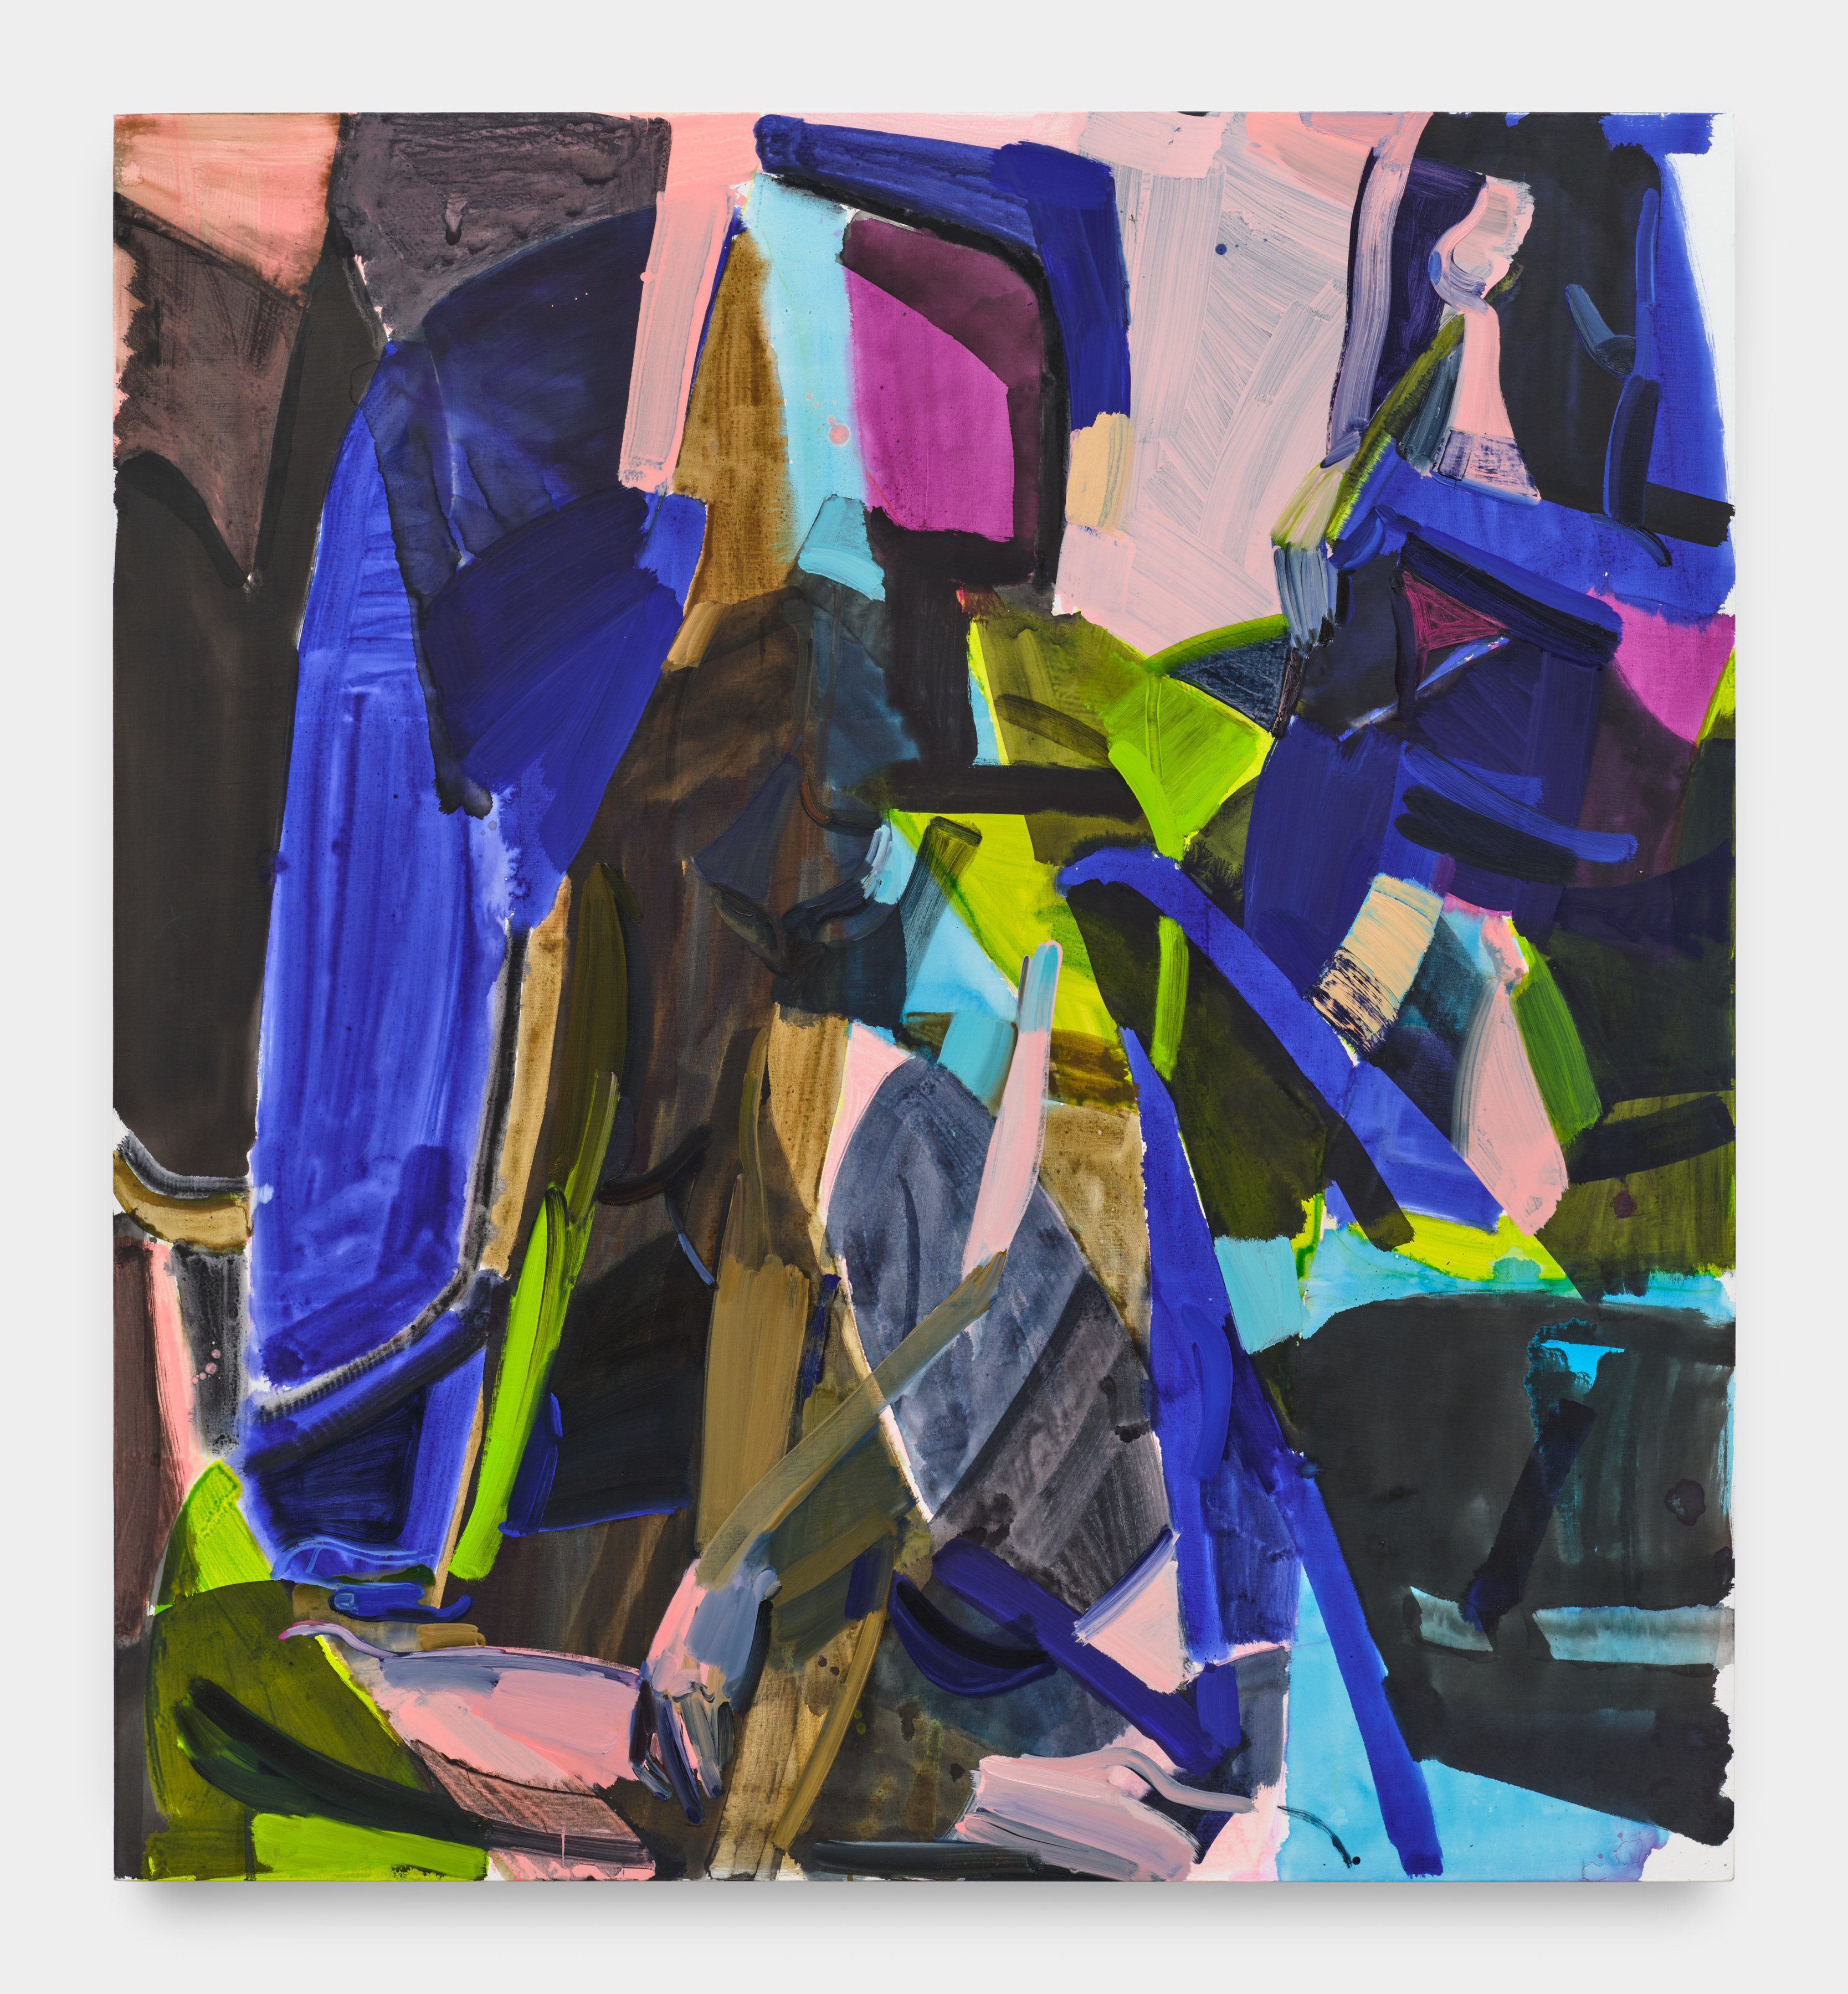 Abstract swatches of indigo, aqua, lime green, pale pink and black comprise a kneeling figure. 